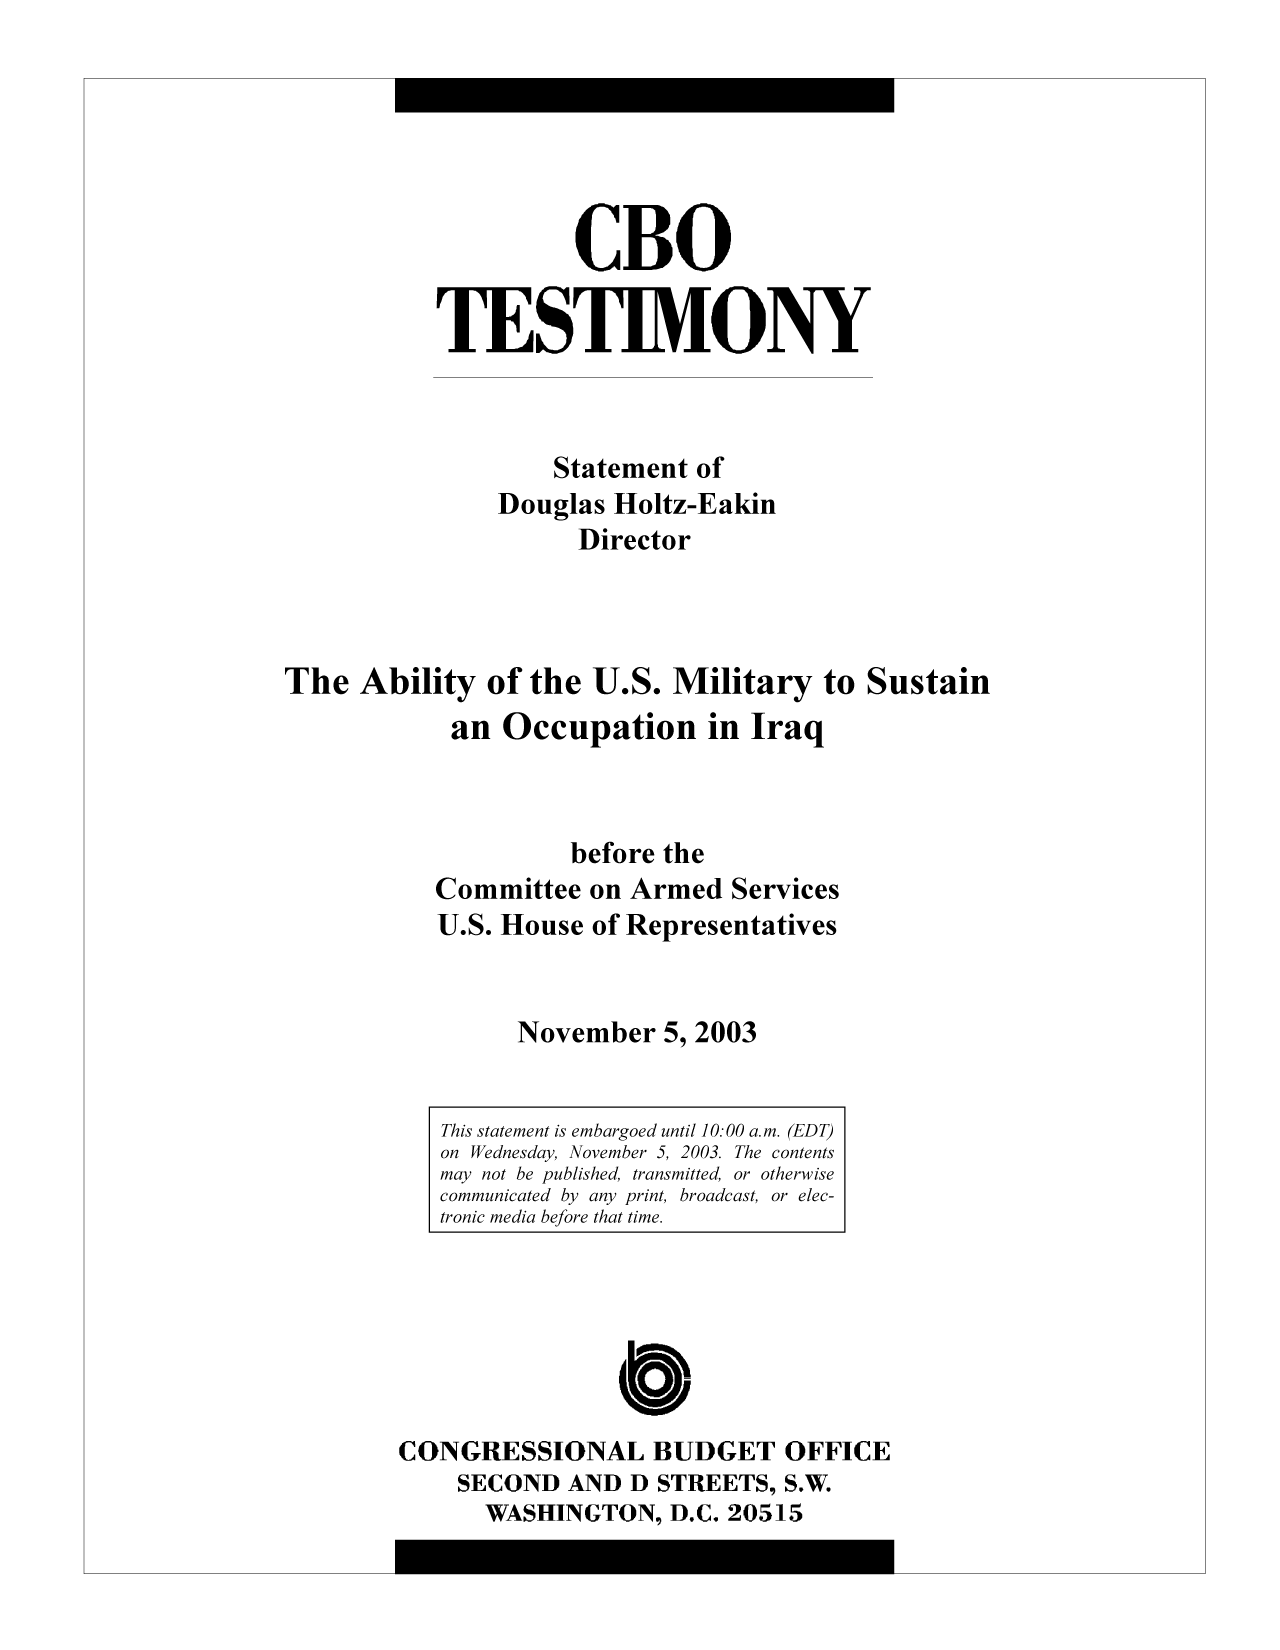 handle is hein.congrec/cbo9974 and id is 1 raw text is: CBO
TESTIMONY
Statement of
Douglas Holtz-Eakin
Director
The Ability of the U.S. Military to Sustain
an Occupation in Iraq
before the
Committee on Armed Services
U.S. House of Representatives
November 5, 2003

This statement is embargoed until 10:00 a.m. (EDT)
on Wednesday, November 5, 2003. The contents
may not be published, transmitted, or otherwise
communicated by any print, broadcast, or elec-
tronic media before that time.

CONGRESSIONAL BUDGET OFFICE
SECOND AND D STREETS, S.W.
WASHINGTON, D.C. 20515


